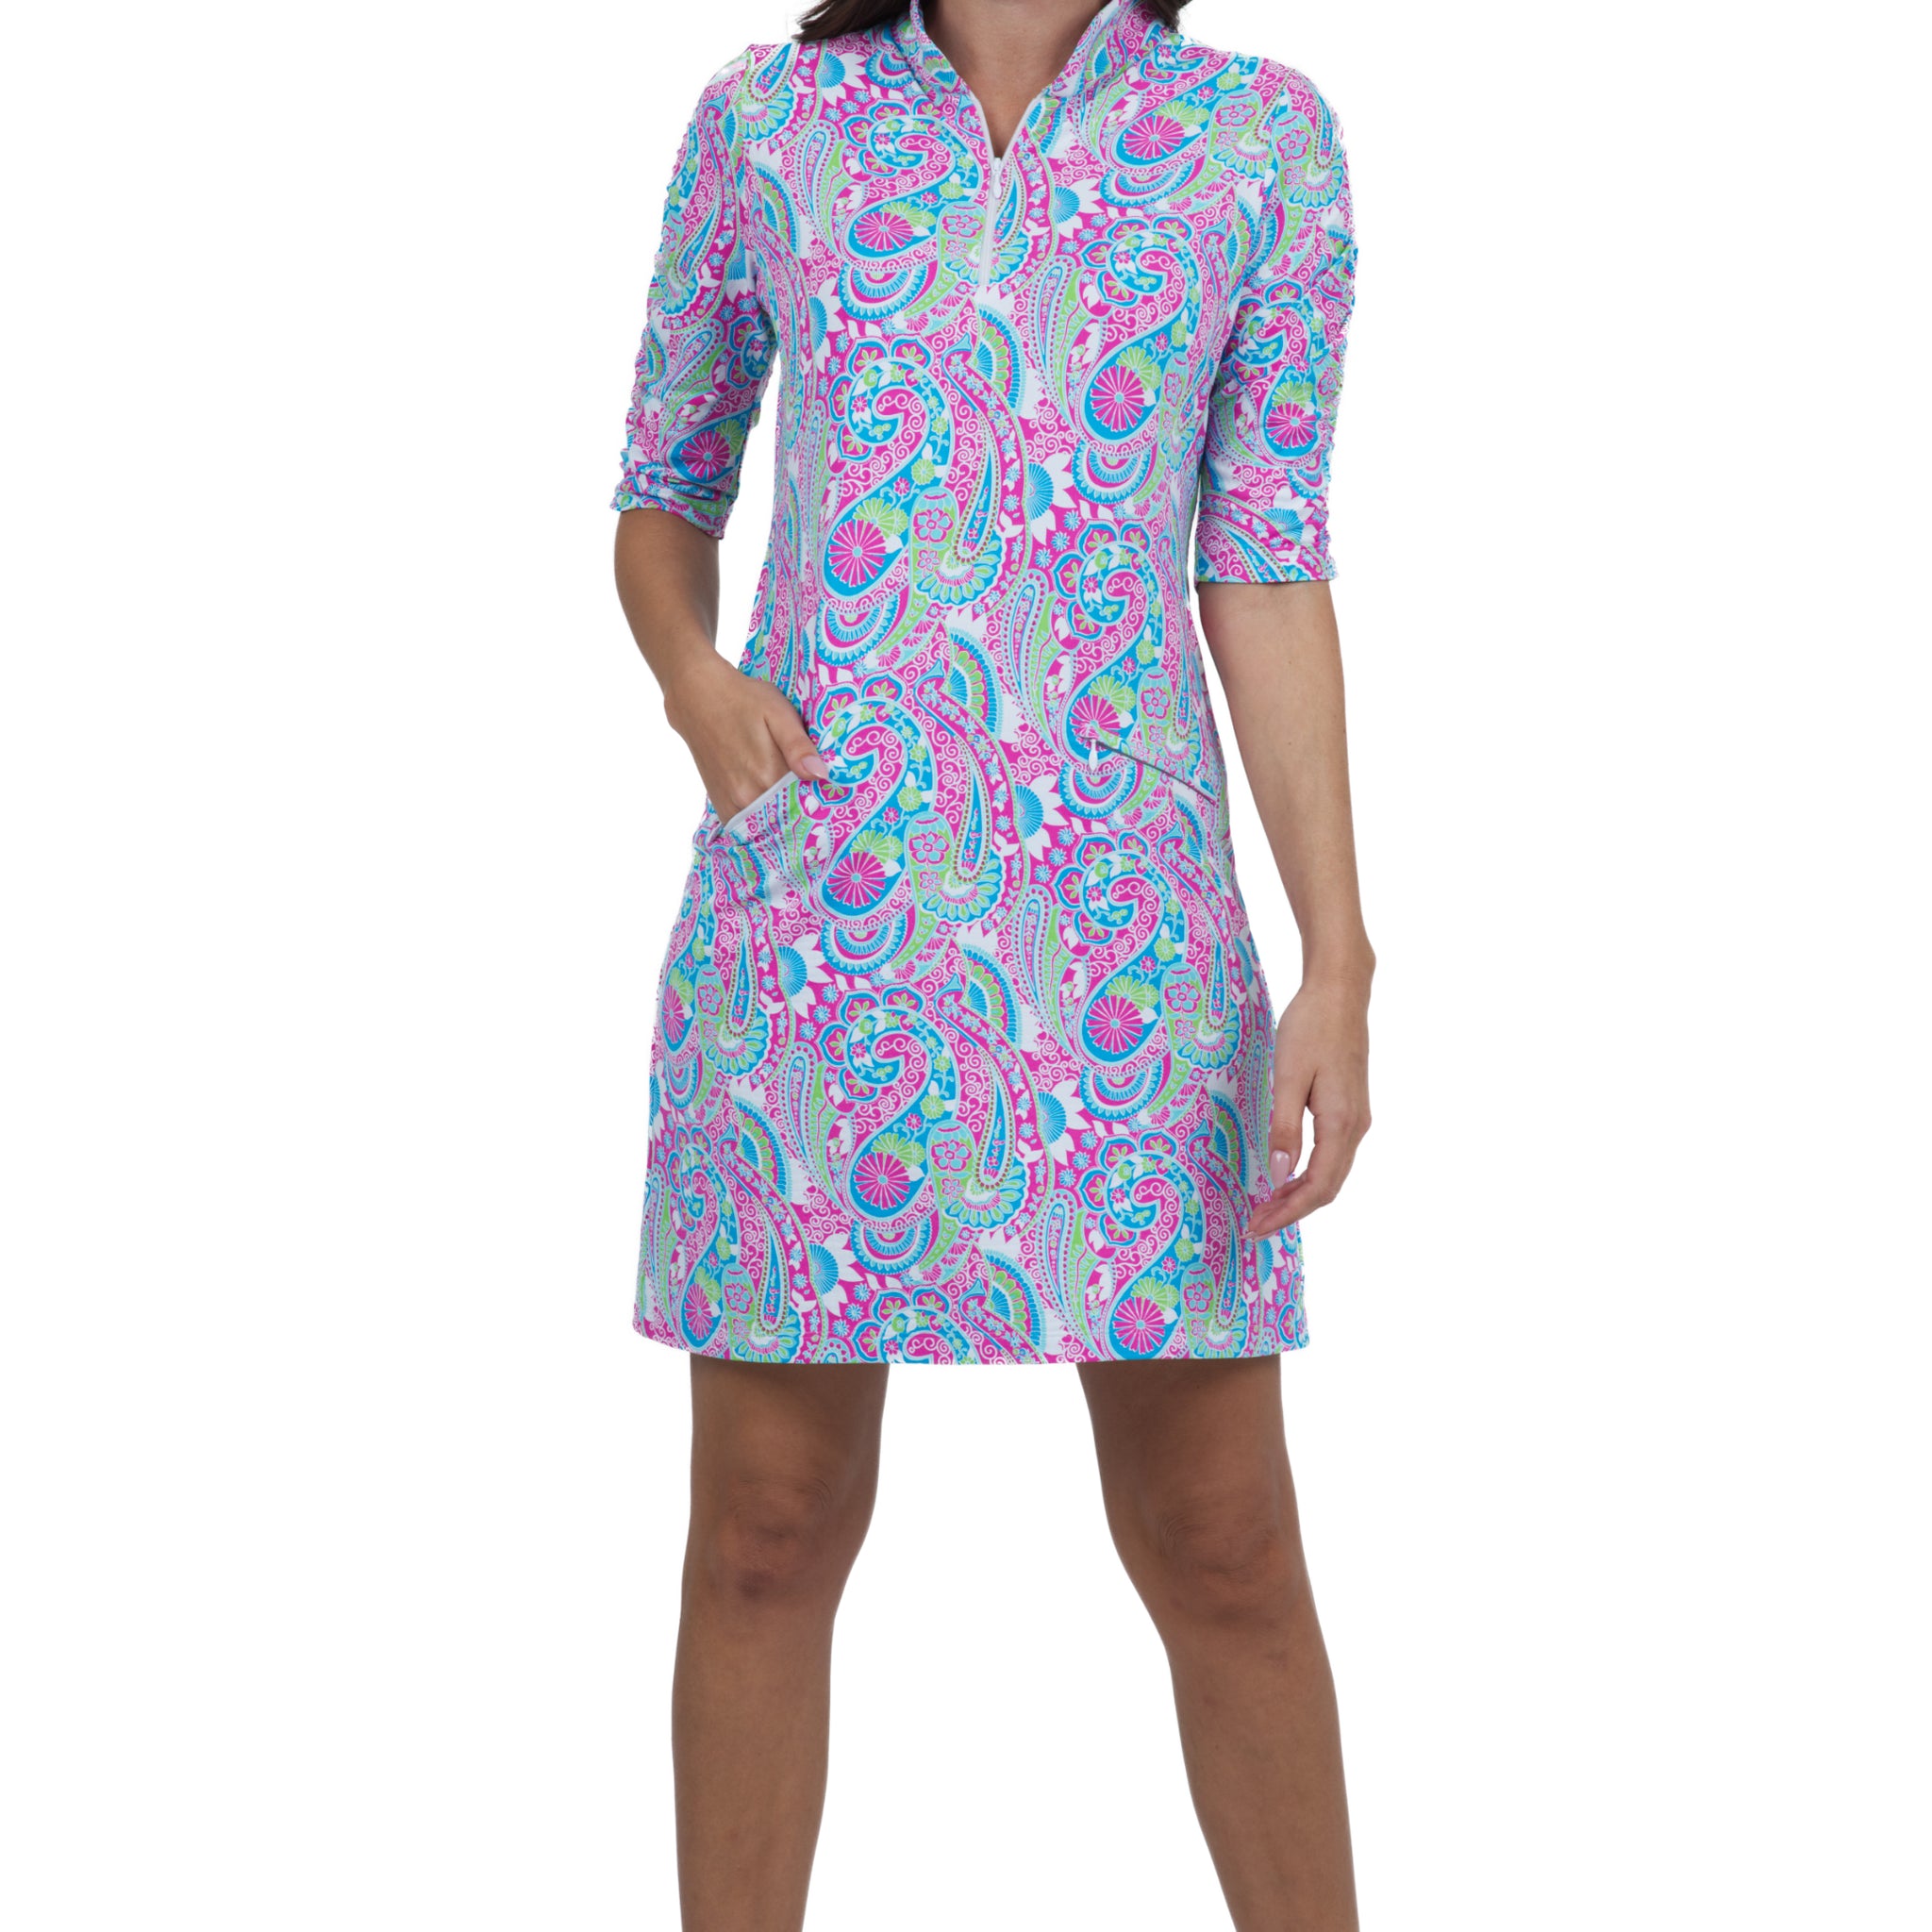 IBKÜL - Gloria Print Ruched Elbow Length Sleeve Dress – 40869 - Color: Hot Pink/Turquoise